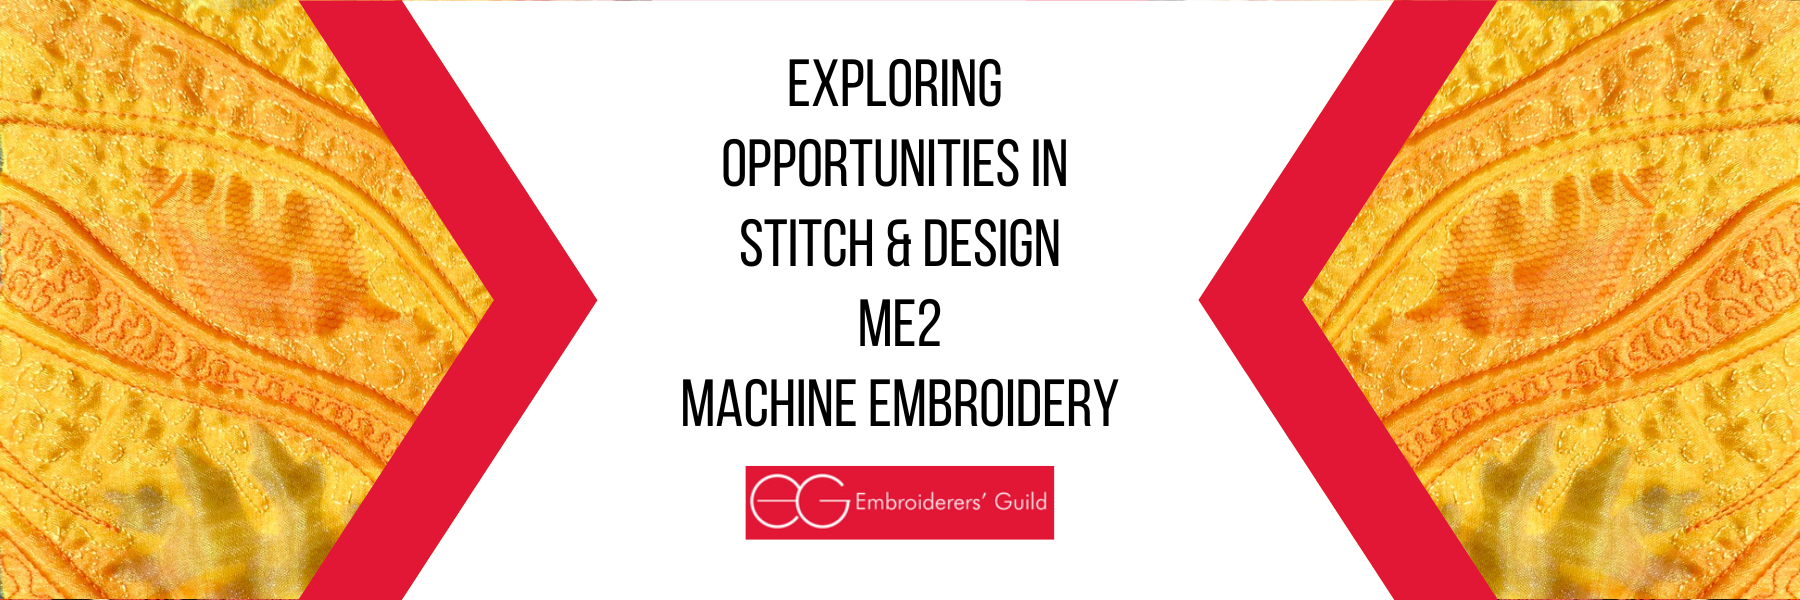 exploring opportunities in stitch  design in machine embroidery online course from The Embroiderers Guild